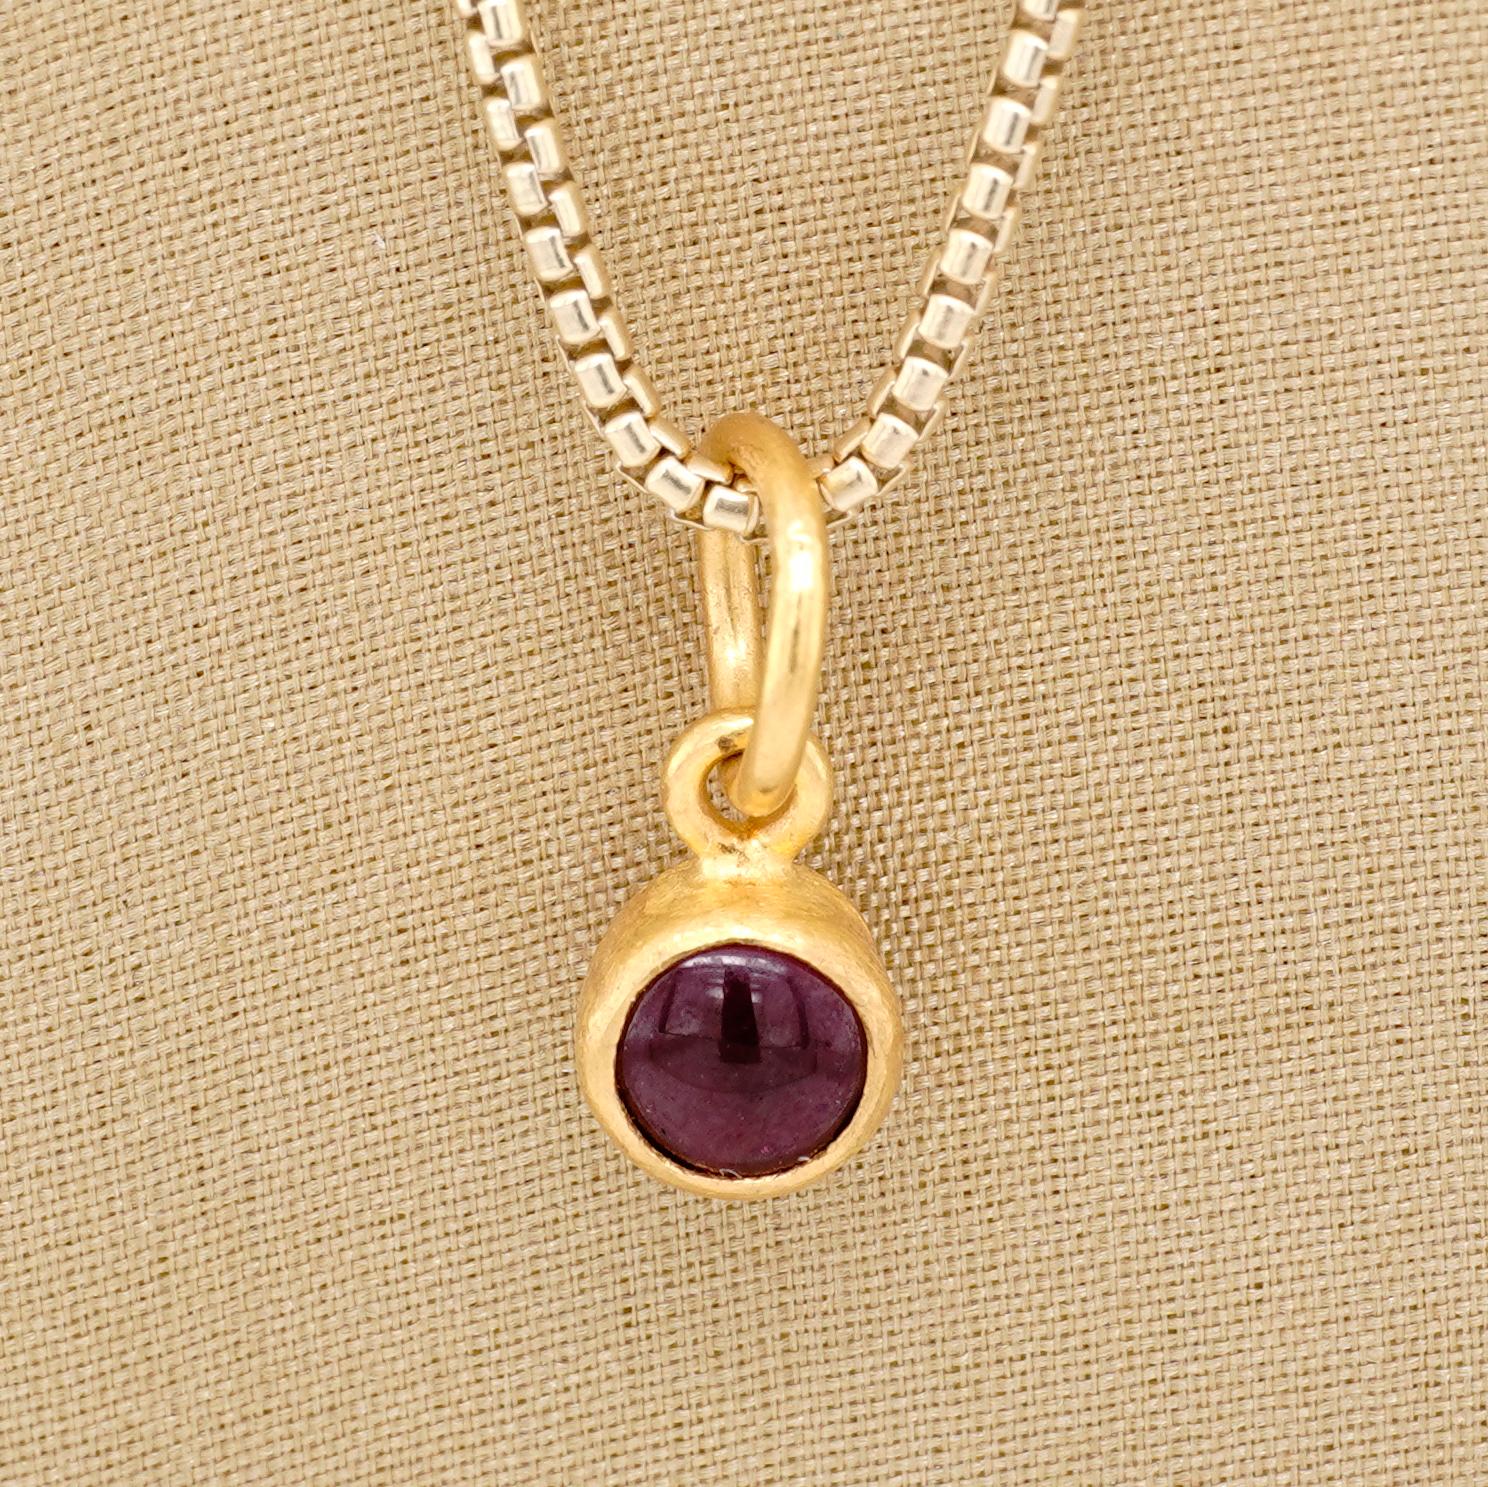 24K Gold Round Smooth Red Garnet Miniature Pendant Necklace, January Birthstone In New Condition For Sale In Bozeman, MT